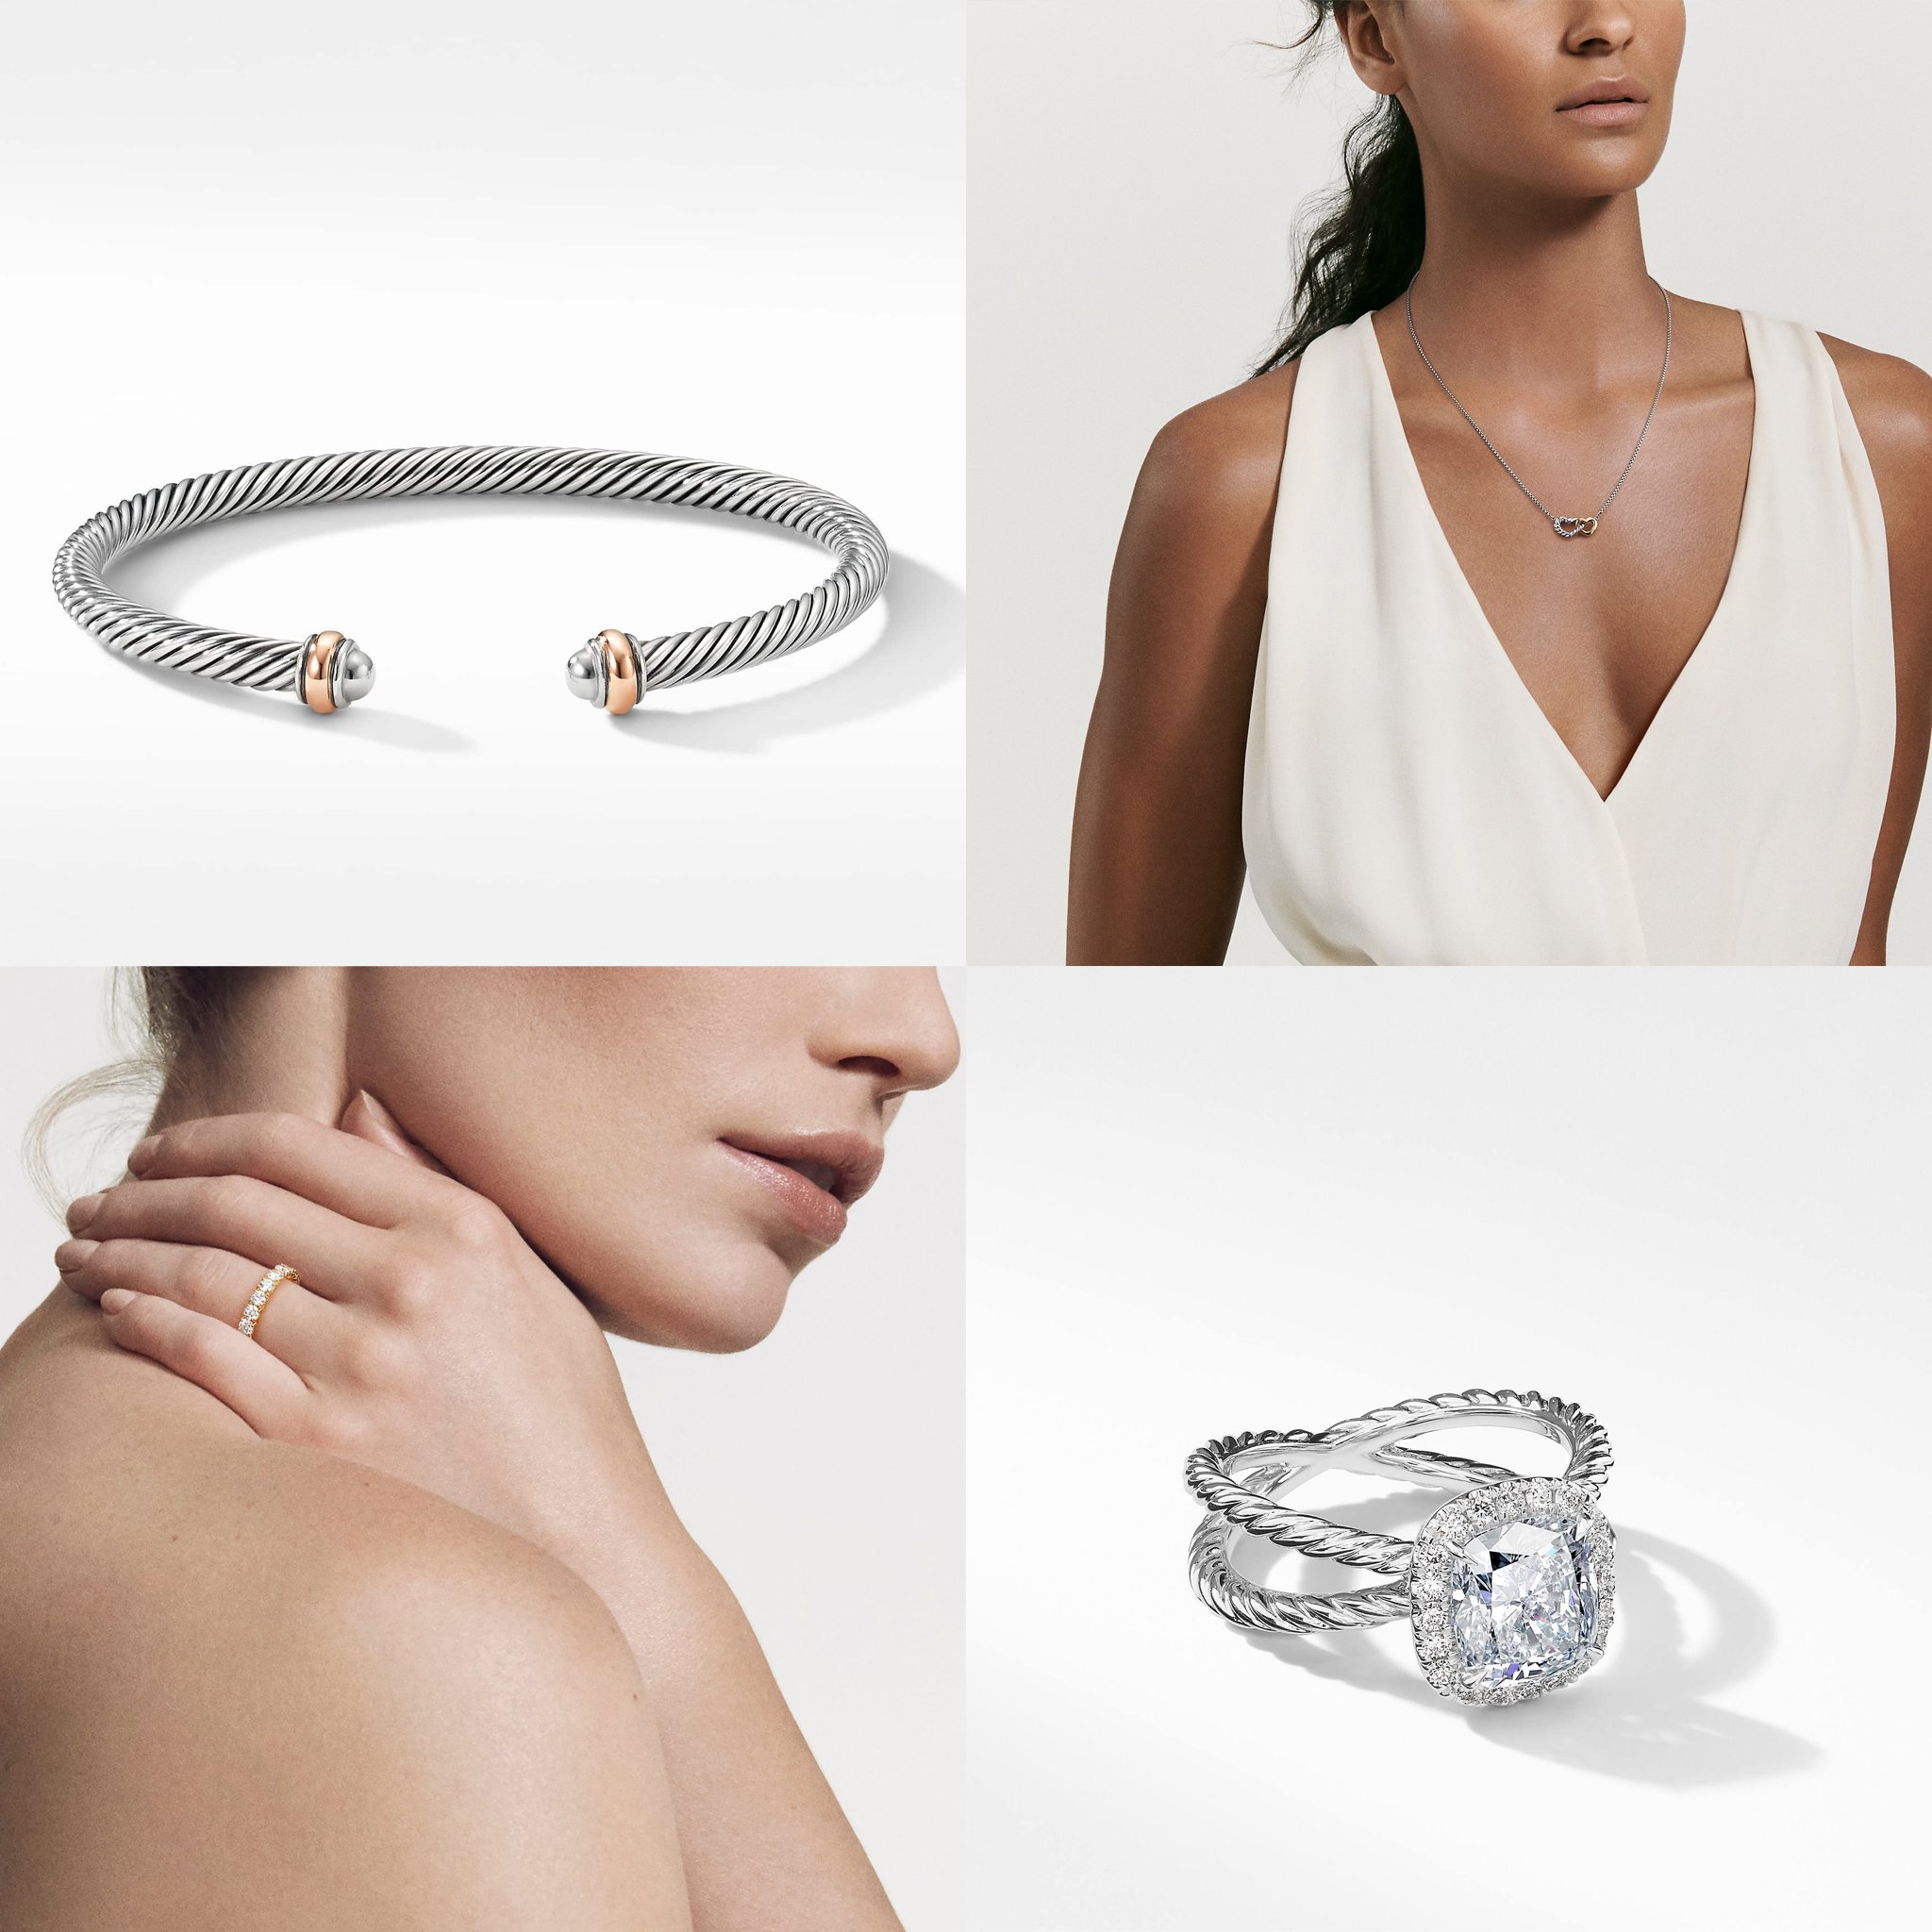 David Yurman Cable Classics Collection bracelet with 18k rose gold, $395; David Yurman Cable Collectibles Double Heart necklace with 18k yellow gold, $350; DY Eden Single Row wedding band with diamonds in 18k gold, $11,000; DY Crossover Capri engagement ring in platinum